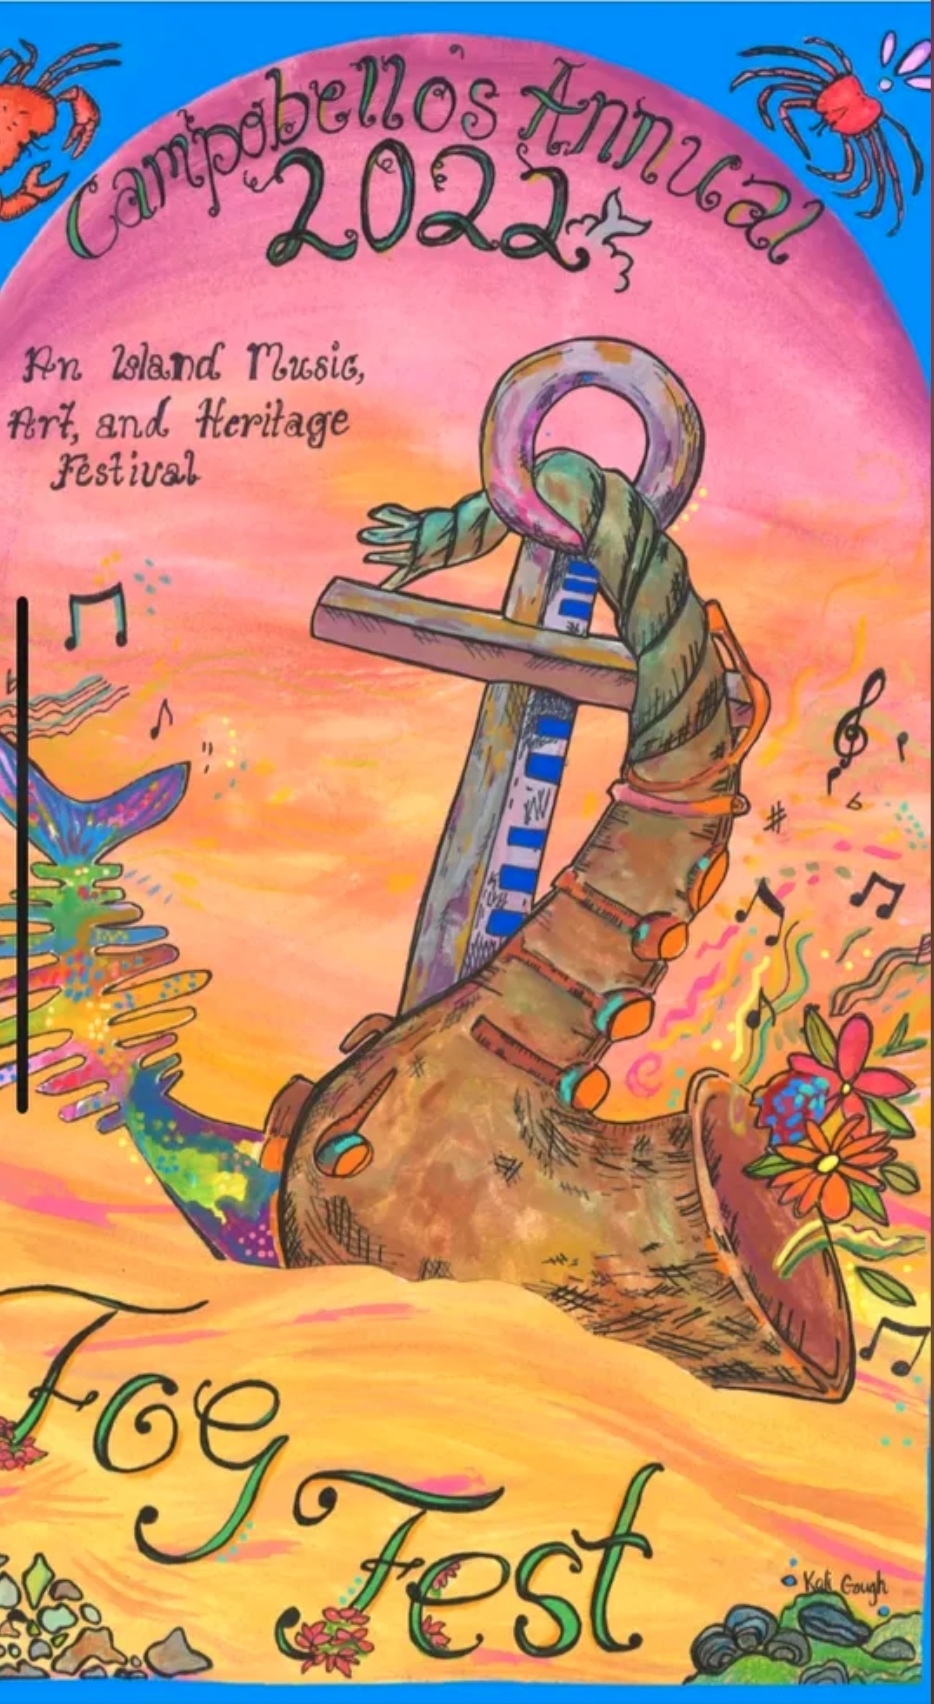 A drawing using coloured pencils of an anchor that is tied to a rope turning into a saxophone. Text reads: Campobello's Annual Fog Fest, an island music, art, and heritage festival.